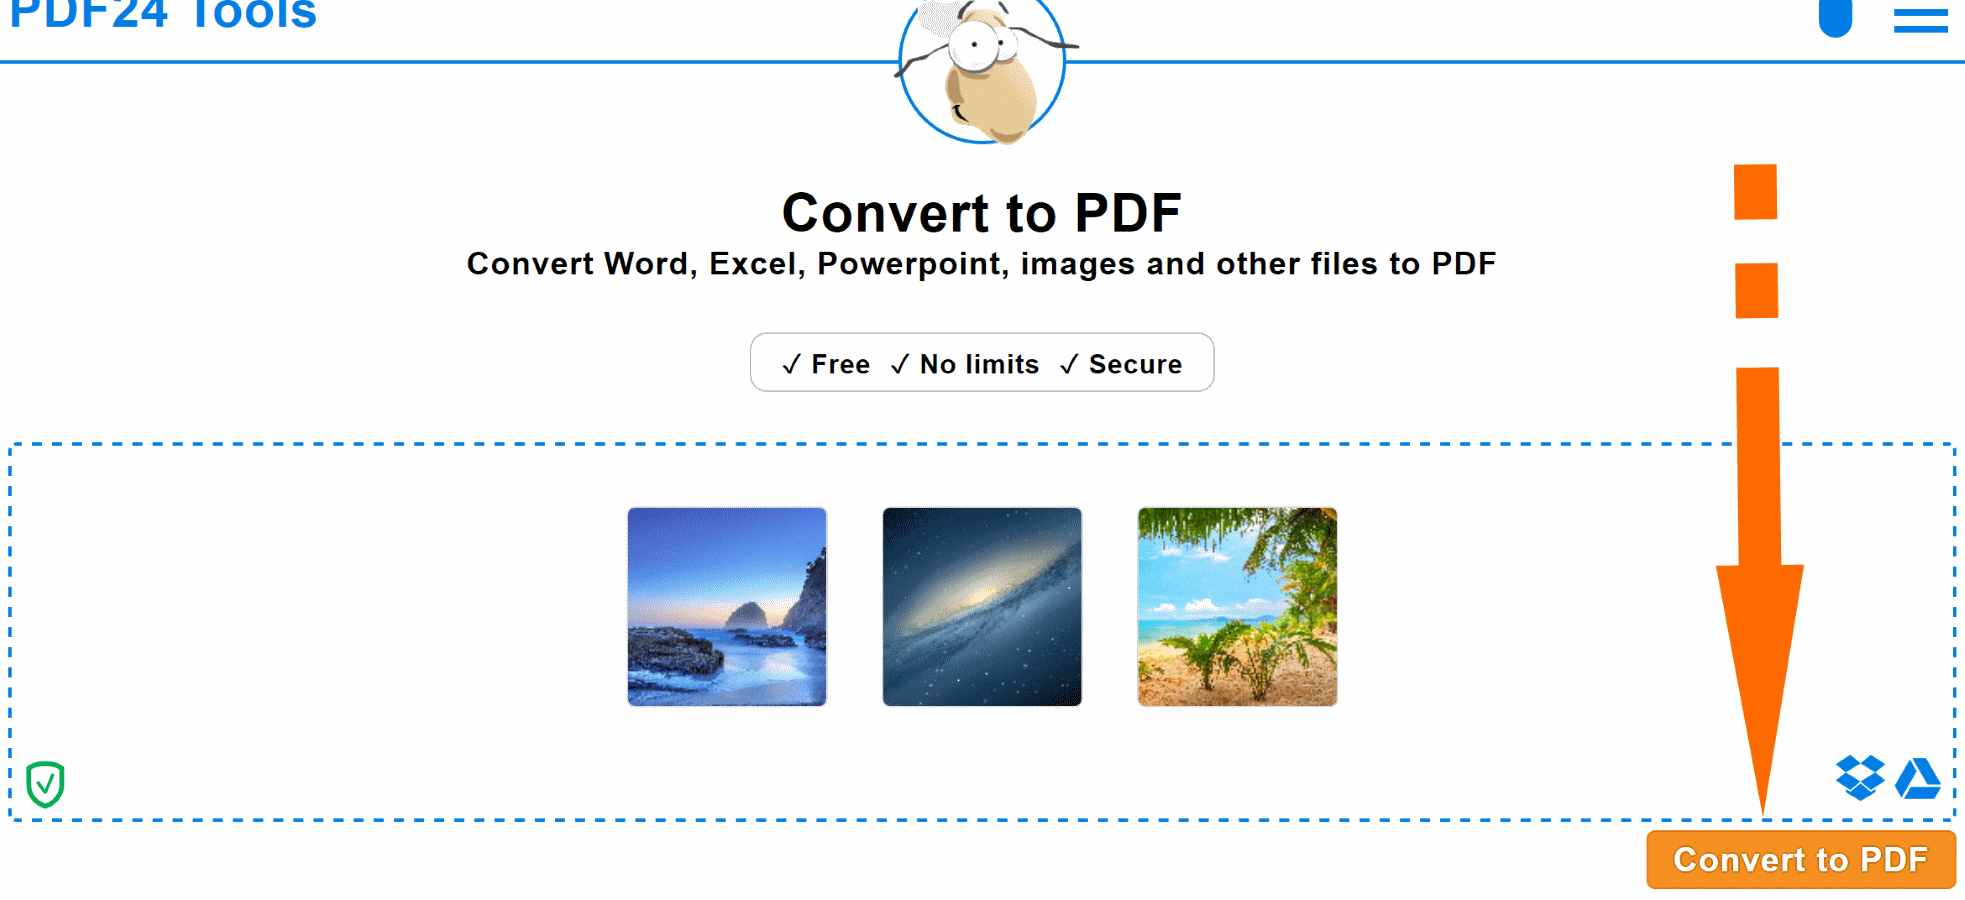 Svg To Pdf Converter Quickly Online Free Pdf24 Tools